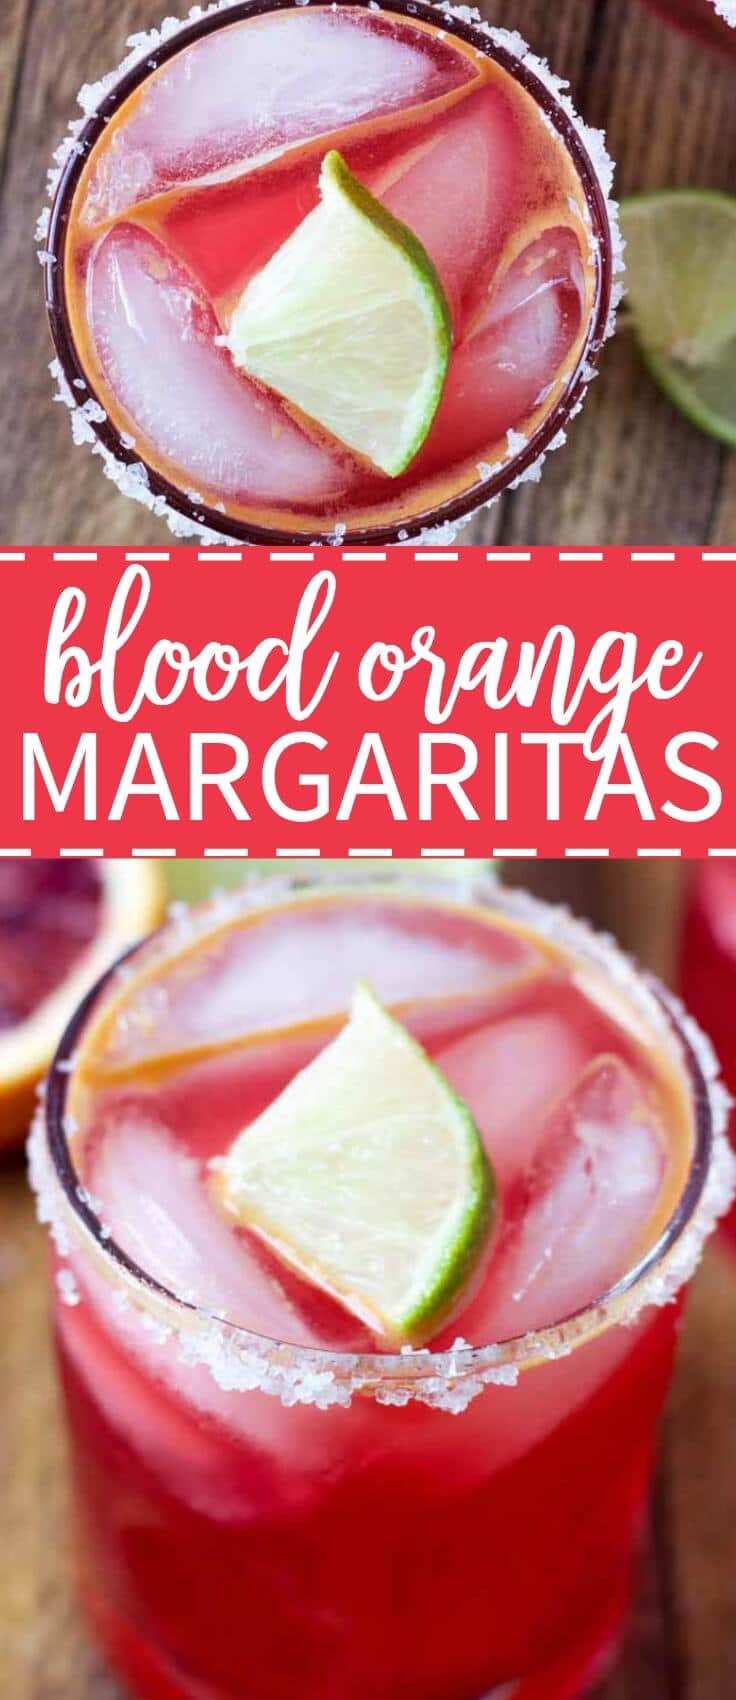 the best cindo de mayo drink recipe! These blood orange margaritas are and easy margarita recipe to make with so much flavor.